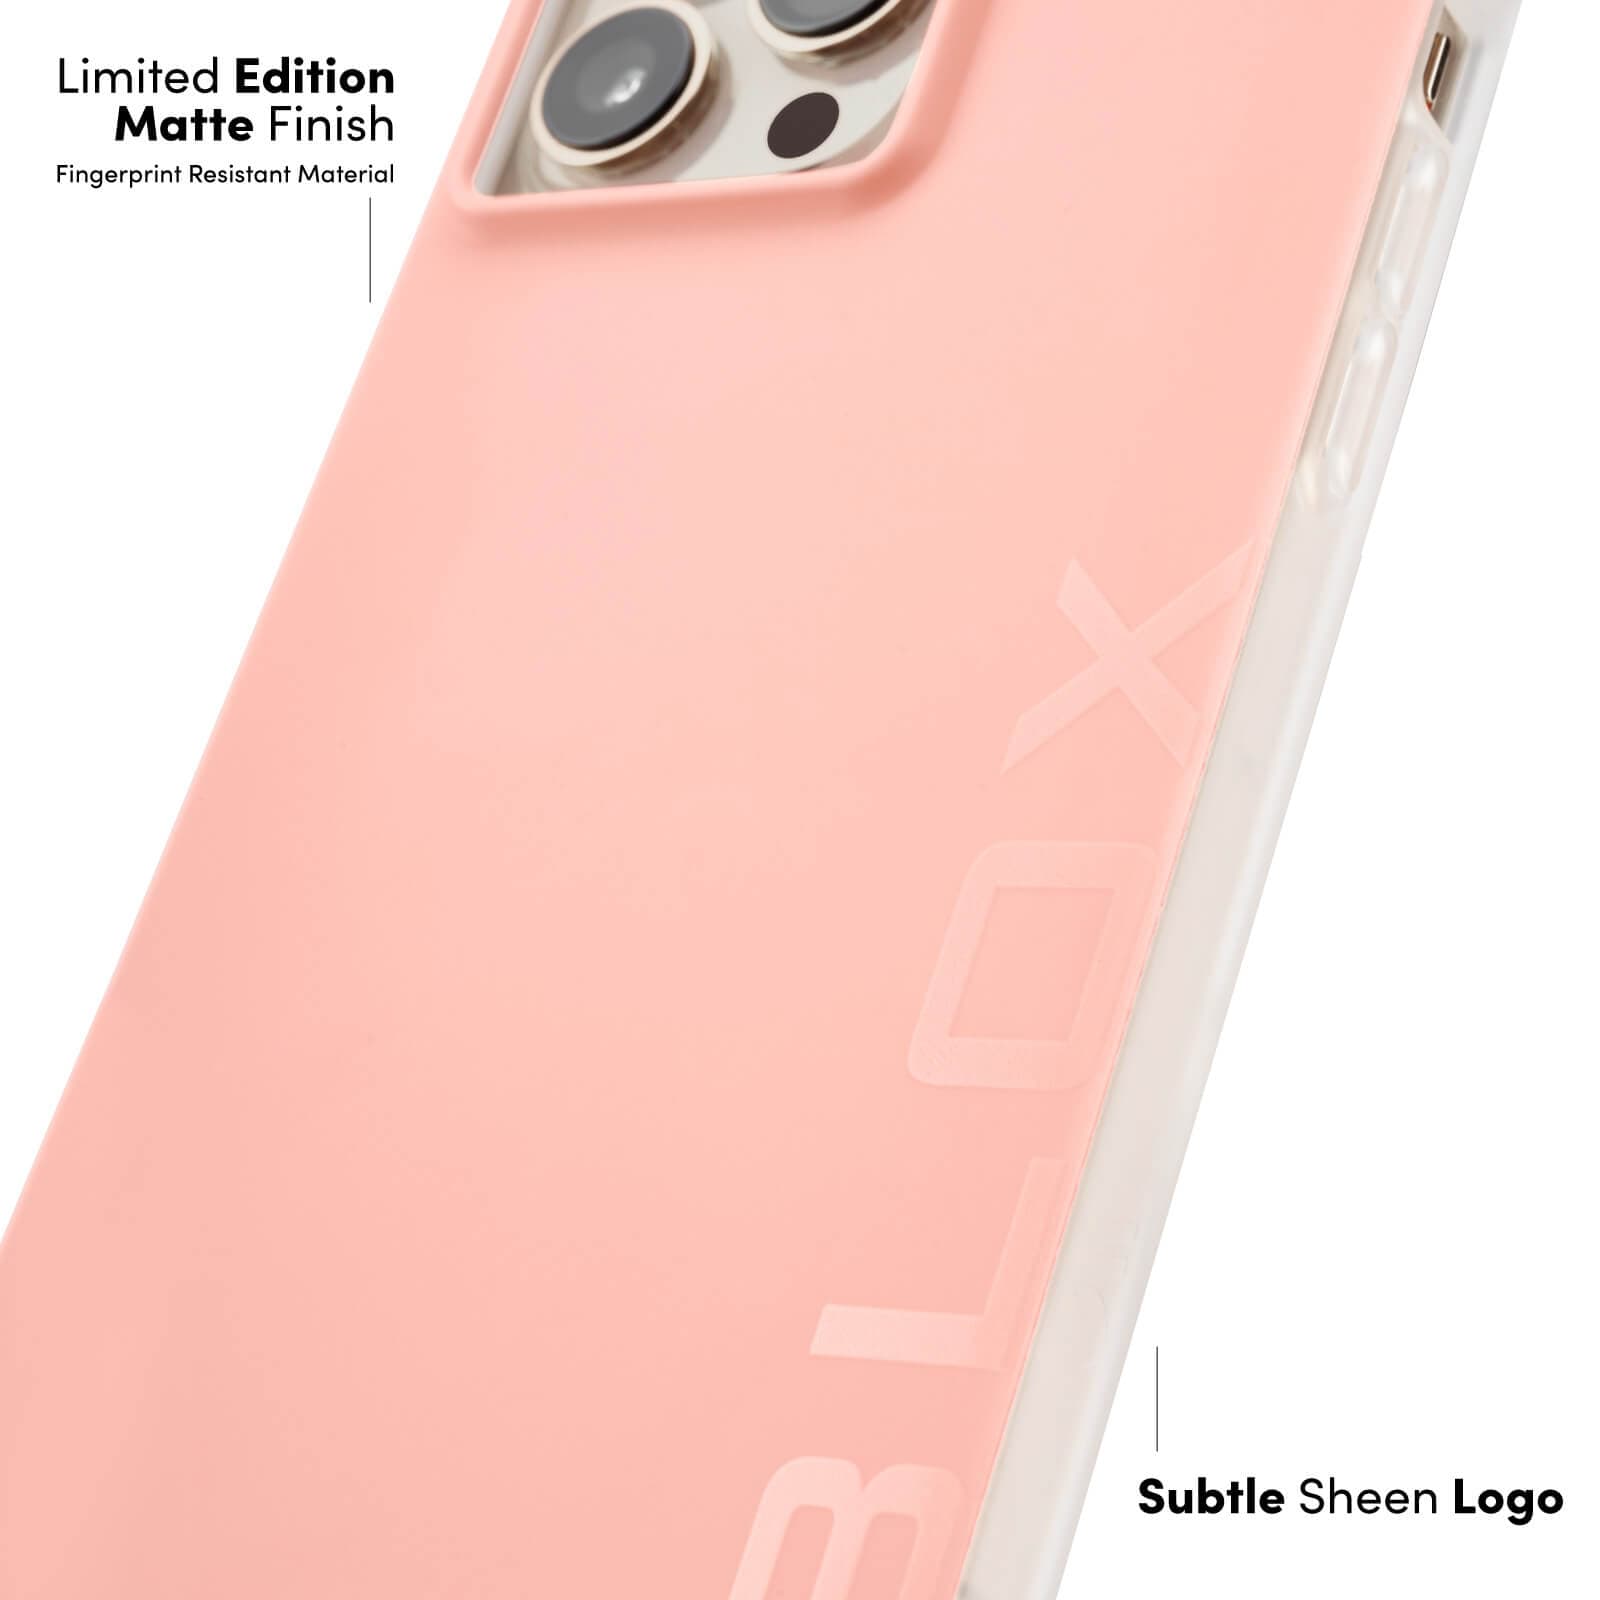 Limited edition matte finish. Fingerprint Resistant Material. color::Clay Pink